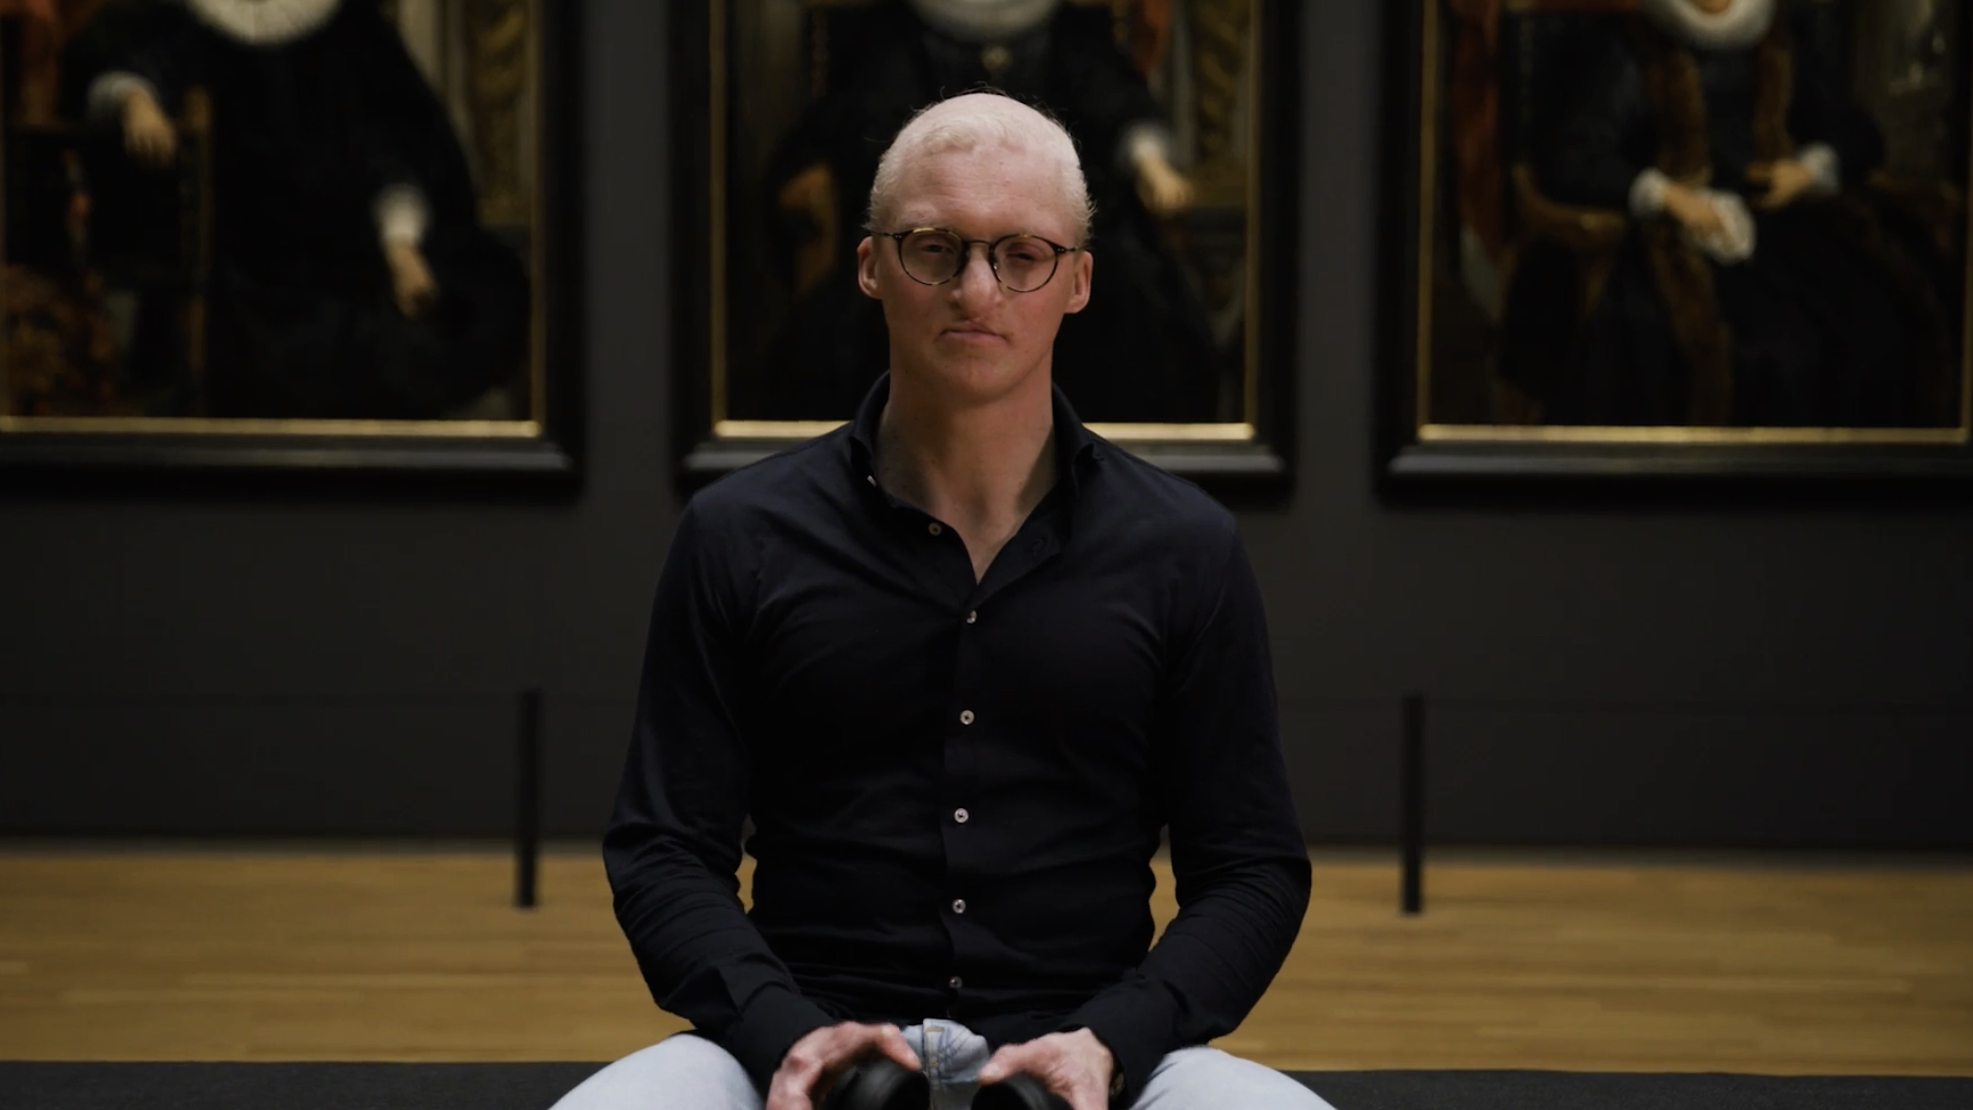 A man with pale skin and white hair meditating on the floor, sitting cross-legged in a gallery with classical paintings in the background.